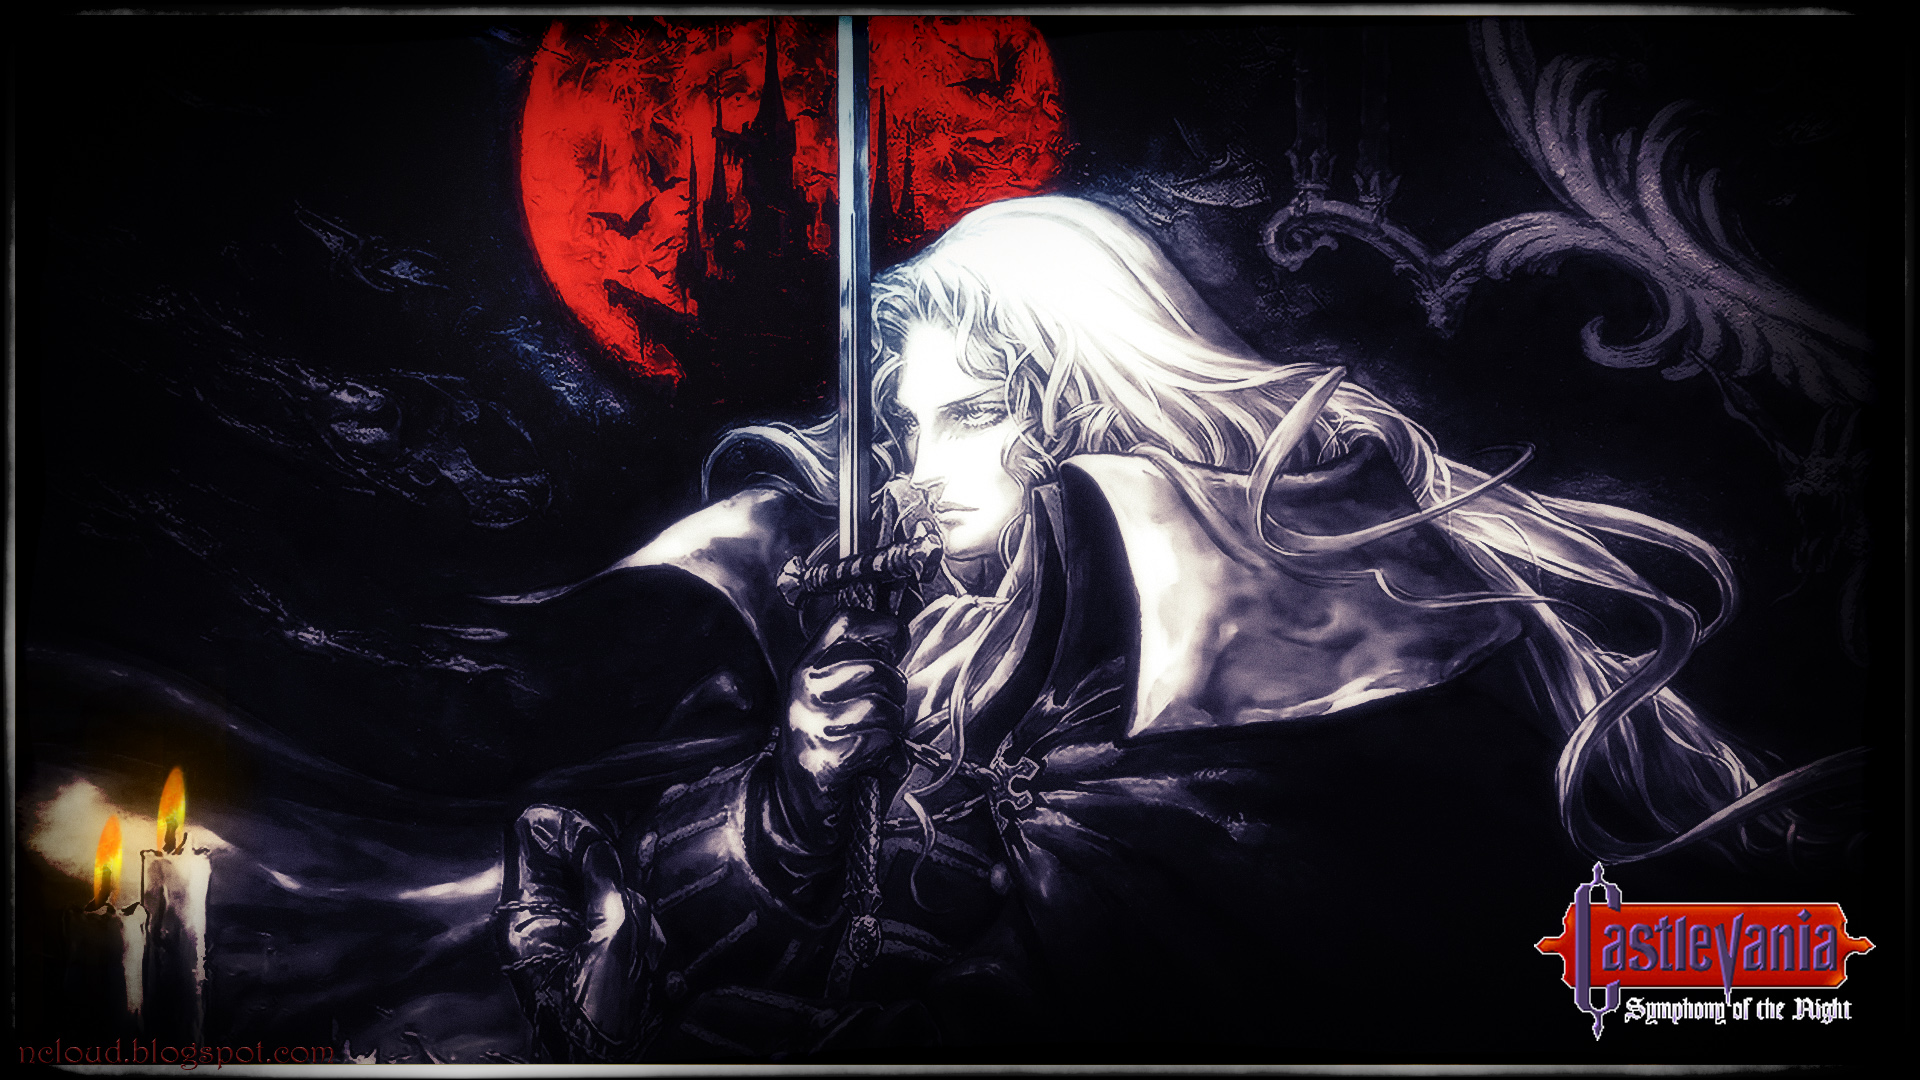 Castlevania Symphony Of The Night Wallpaper Sf Wallpaper - Castlevania Symphony Of The Night , HD Wallpaper & Backgrounds